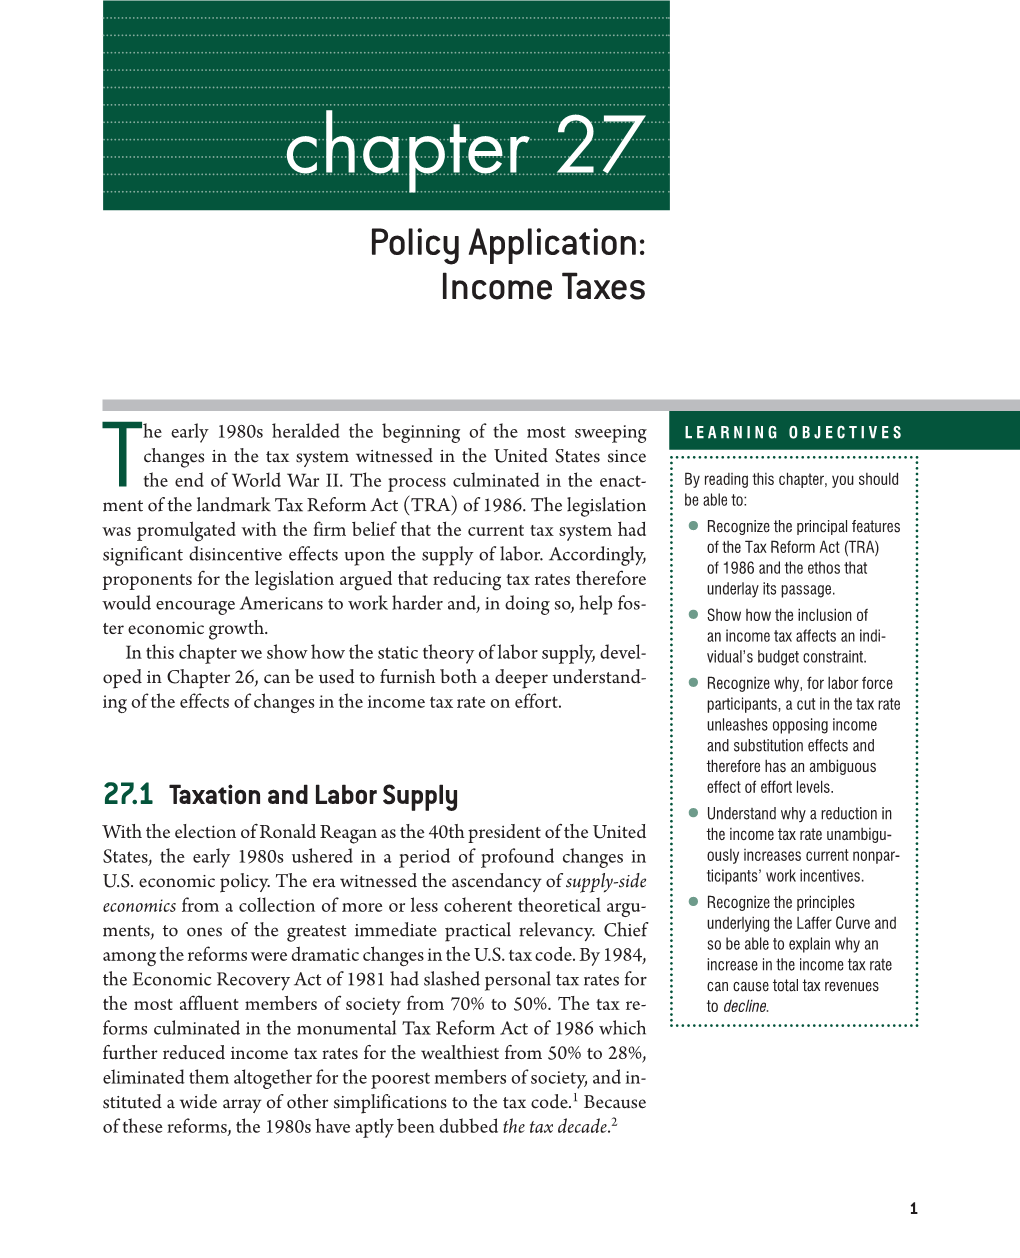 Chapter 27 Policy Application: Income Taxes